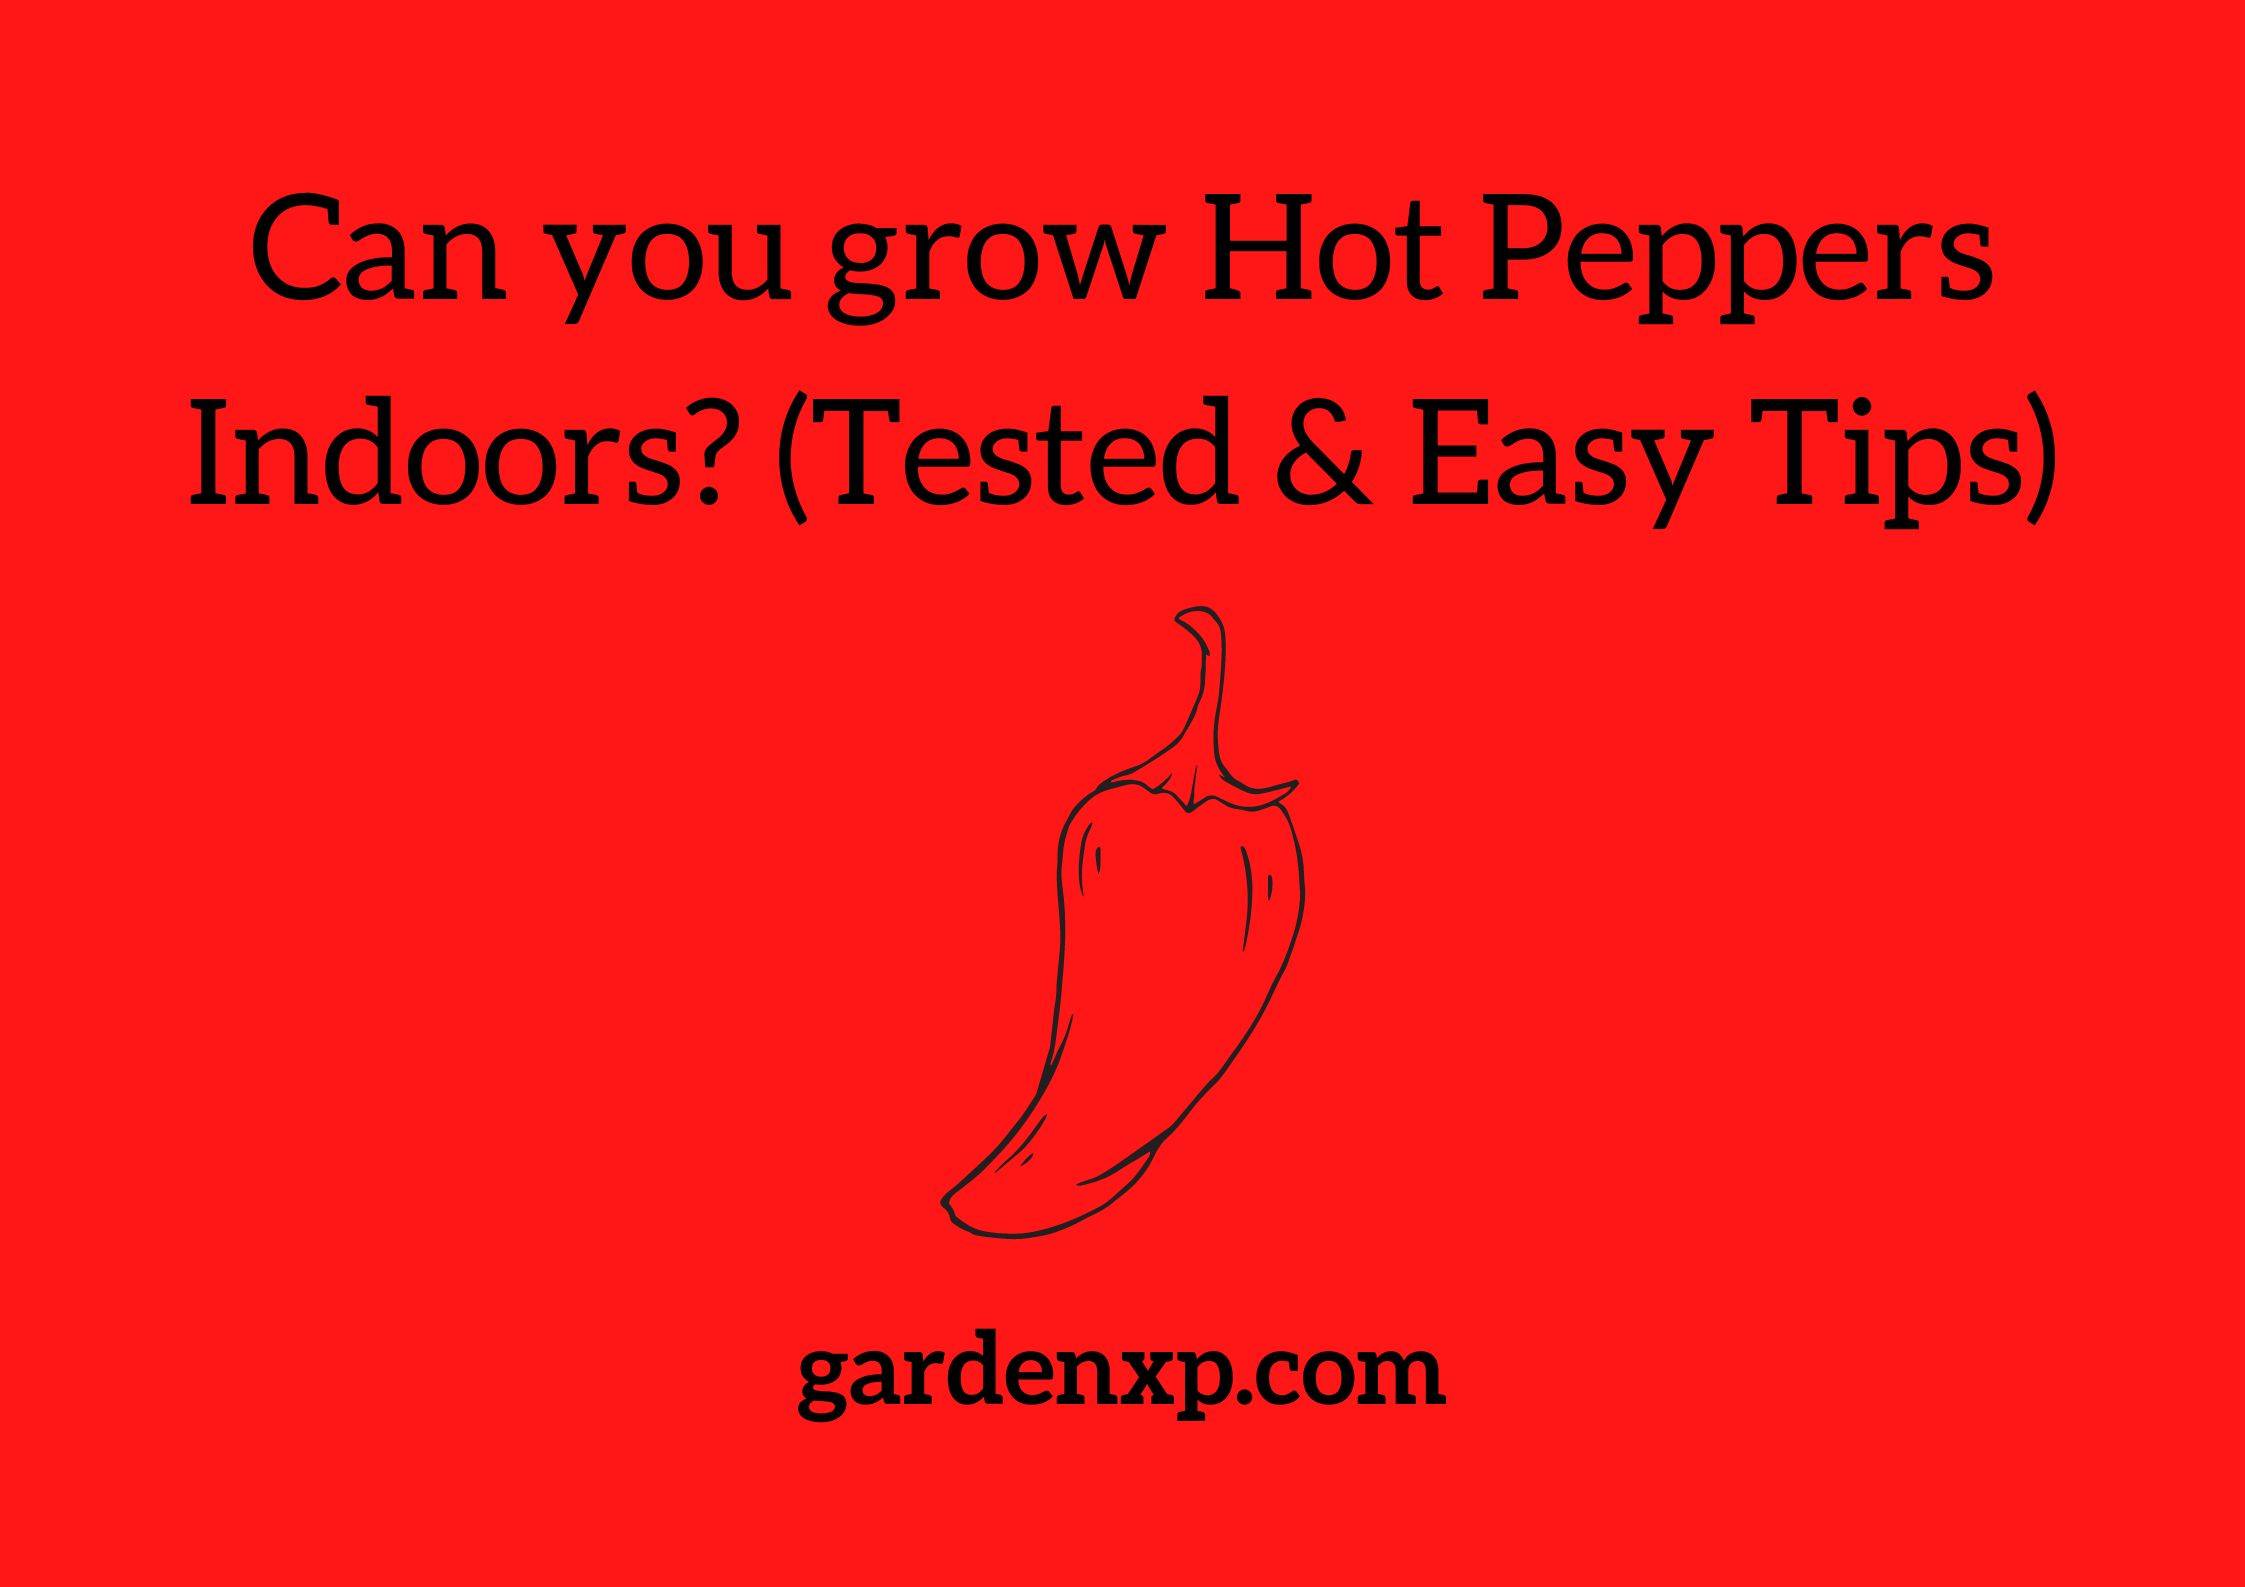 Can you grow Hot Peppers Indoors? (Tested & Easy Tips)